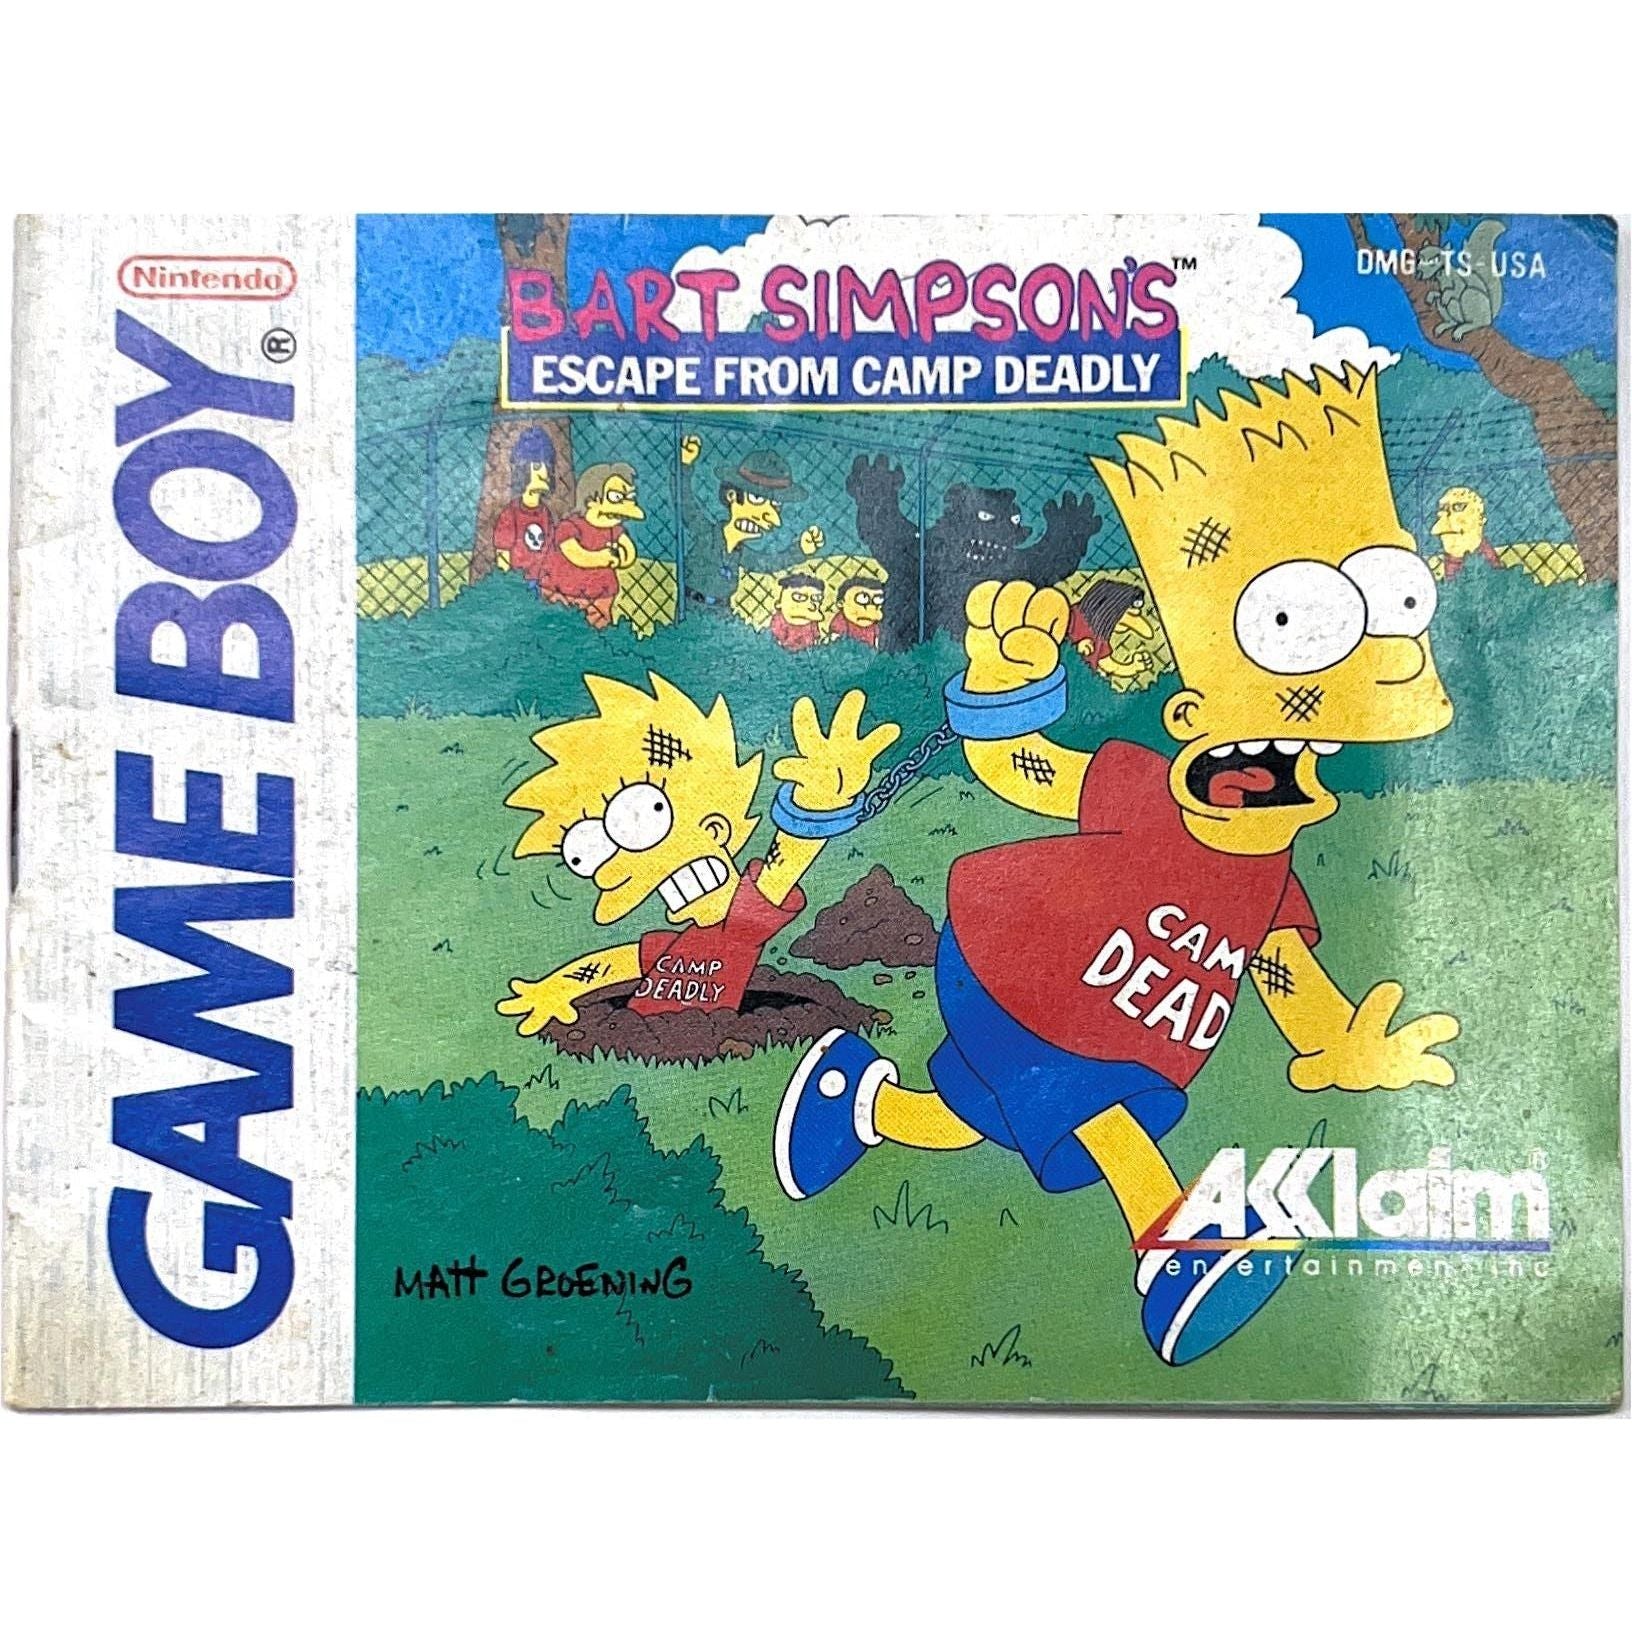 GB - Bart Simpsons Escape from Camp Deadly (Manual)